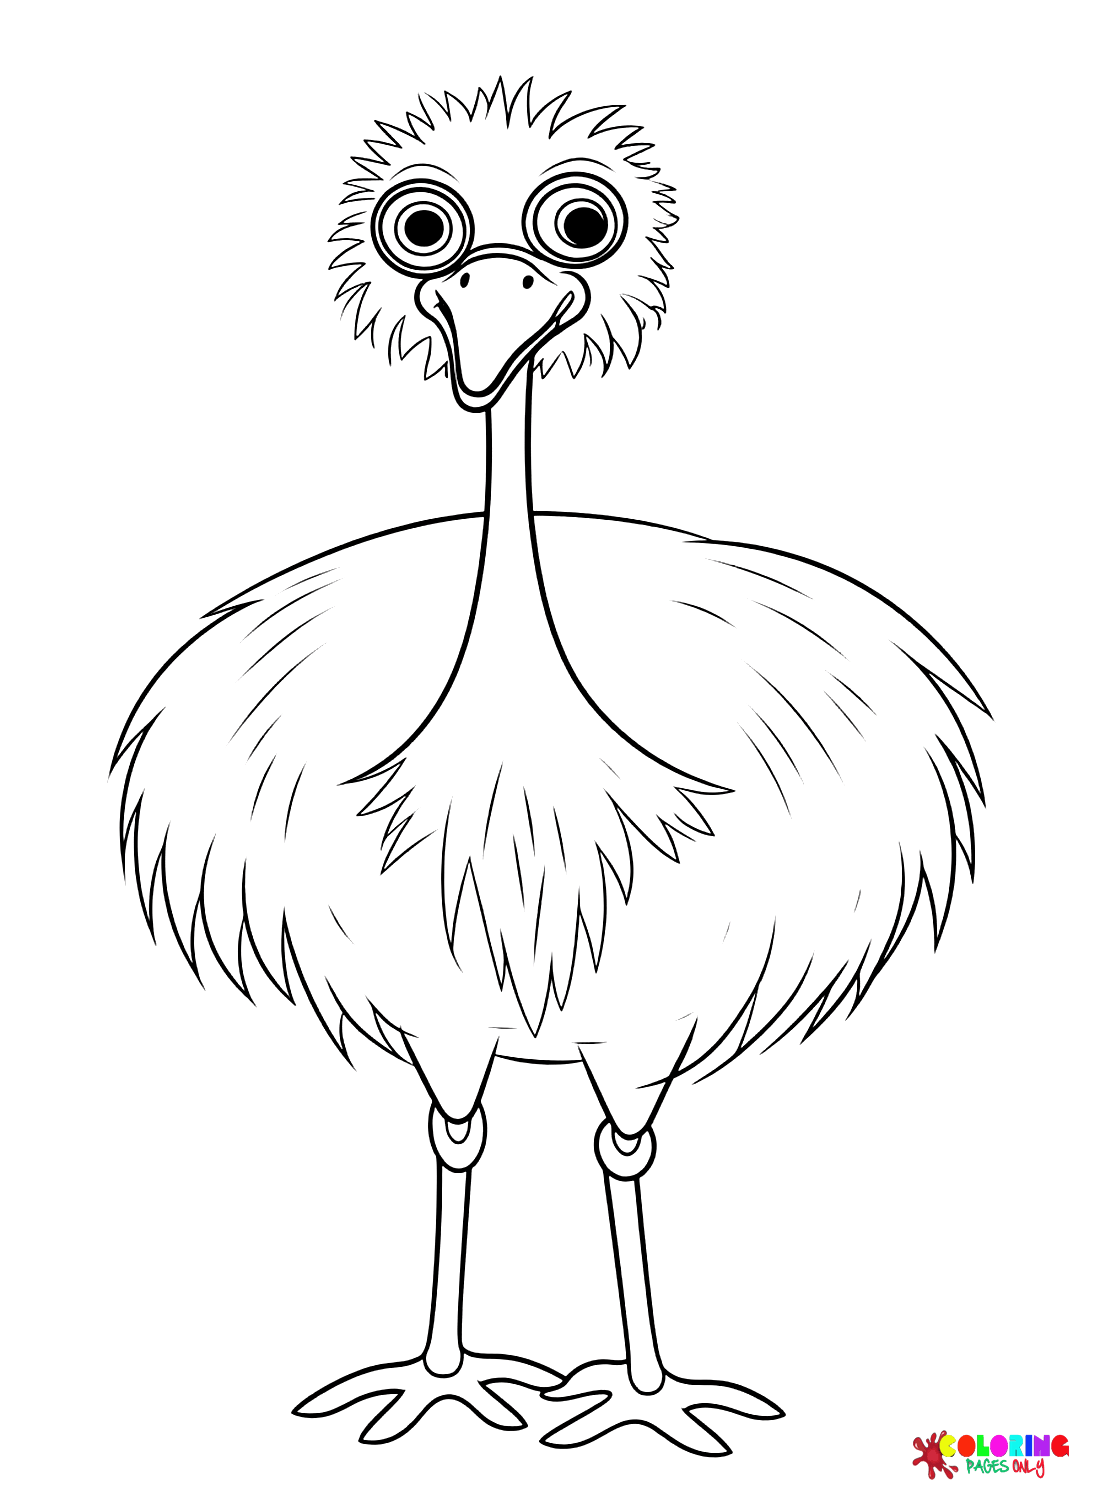 Emu coloring pages